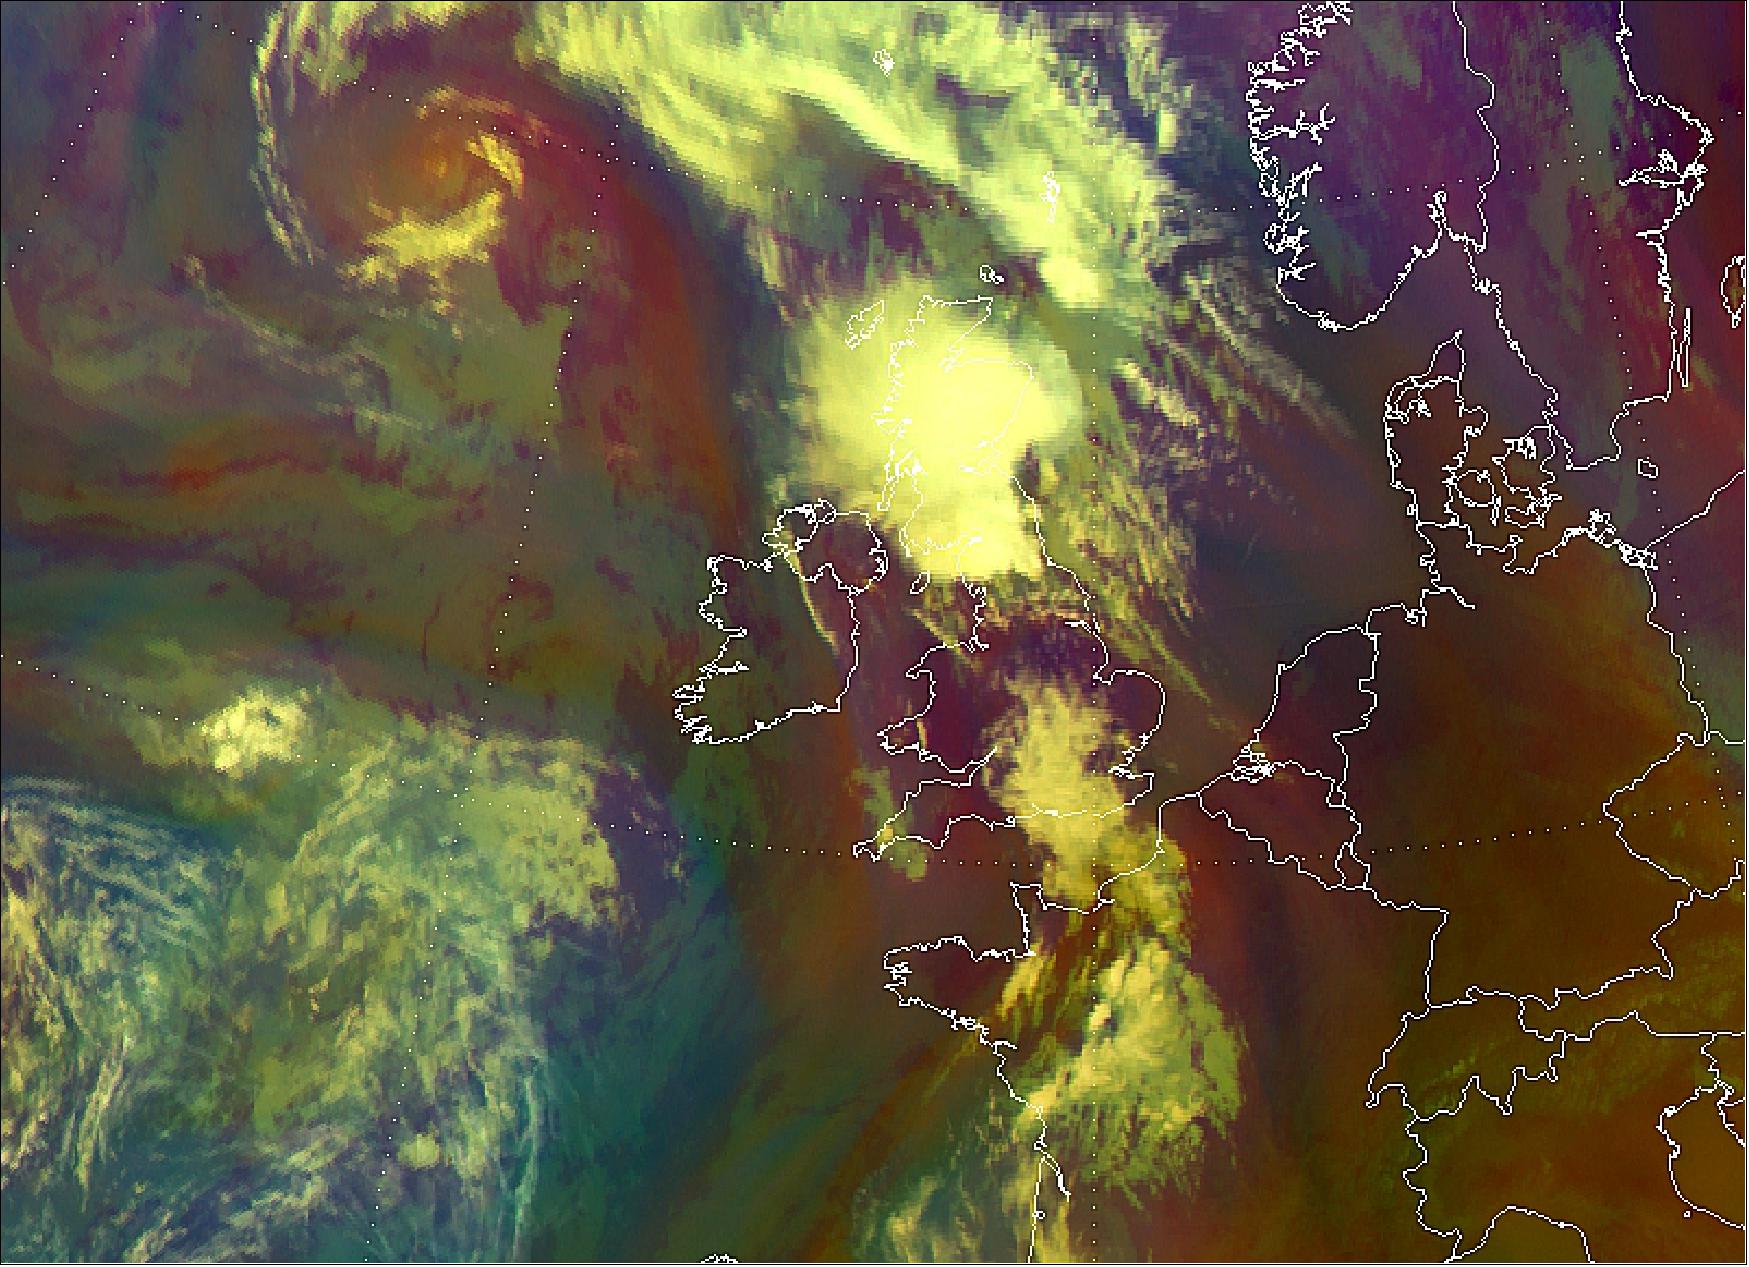 Figure 14: Meteosat-10 Airmass RGB image on 20 July 2016 at 09:00 UTC shows a cold front moving northeast across the UK. Rainfall totals exceeded 50 mm in areas of Wales and northwest England, and more than 30 mm in places in Scotland. A large MCS (Mesoscale Convective System) can be seen developing in the Irish sea and moving northeast over Scotland (image credit: EUMETSAT)